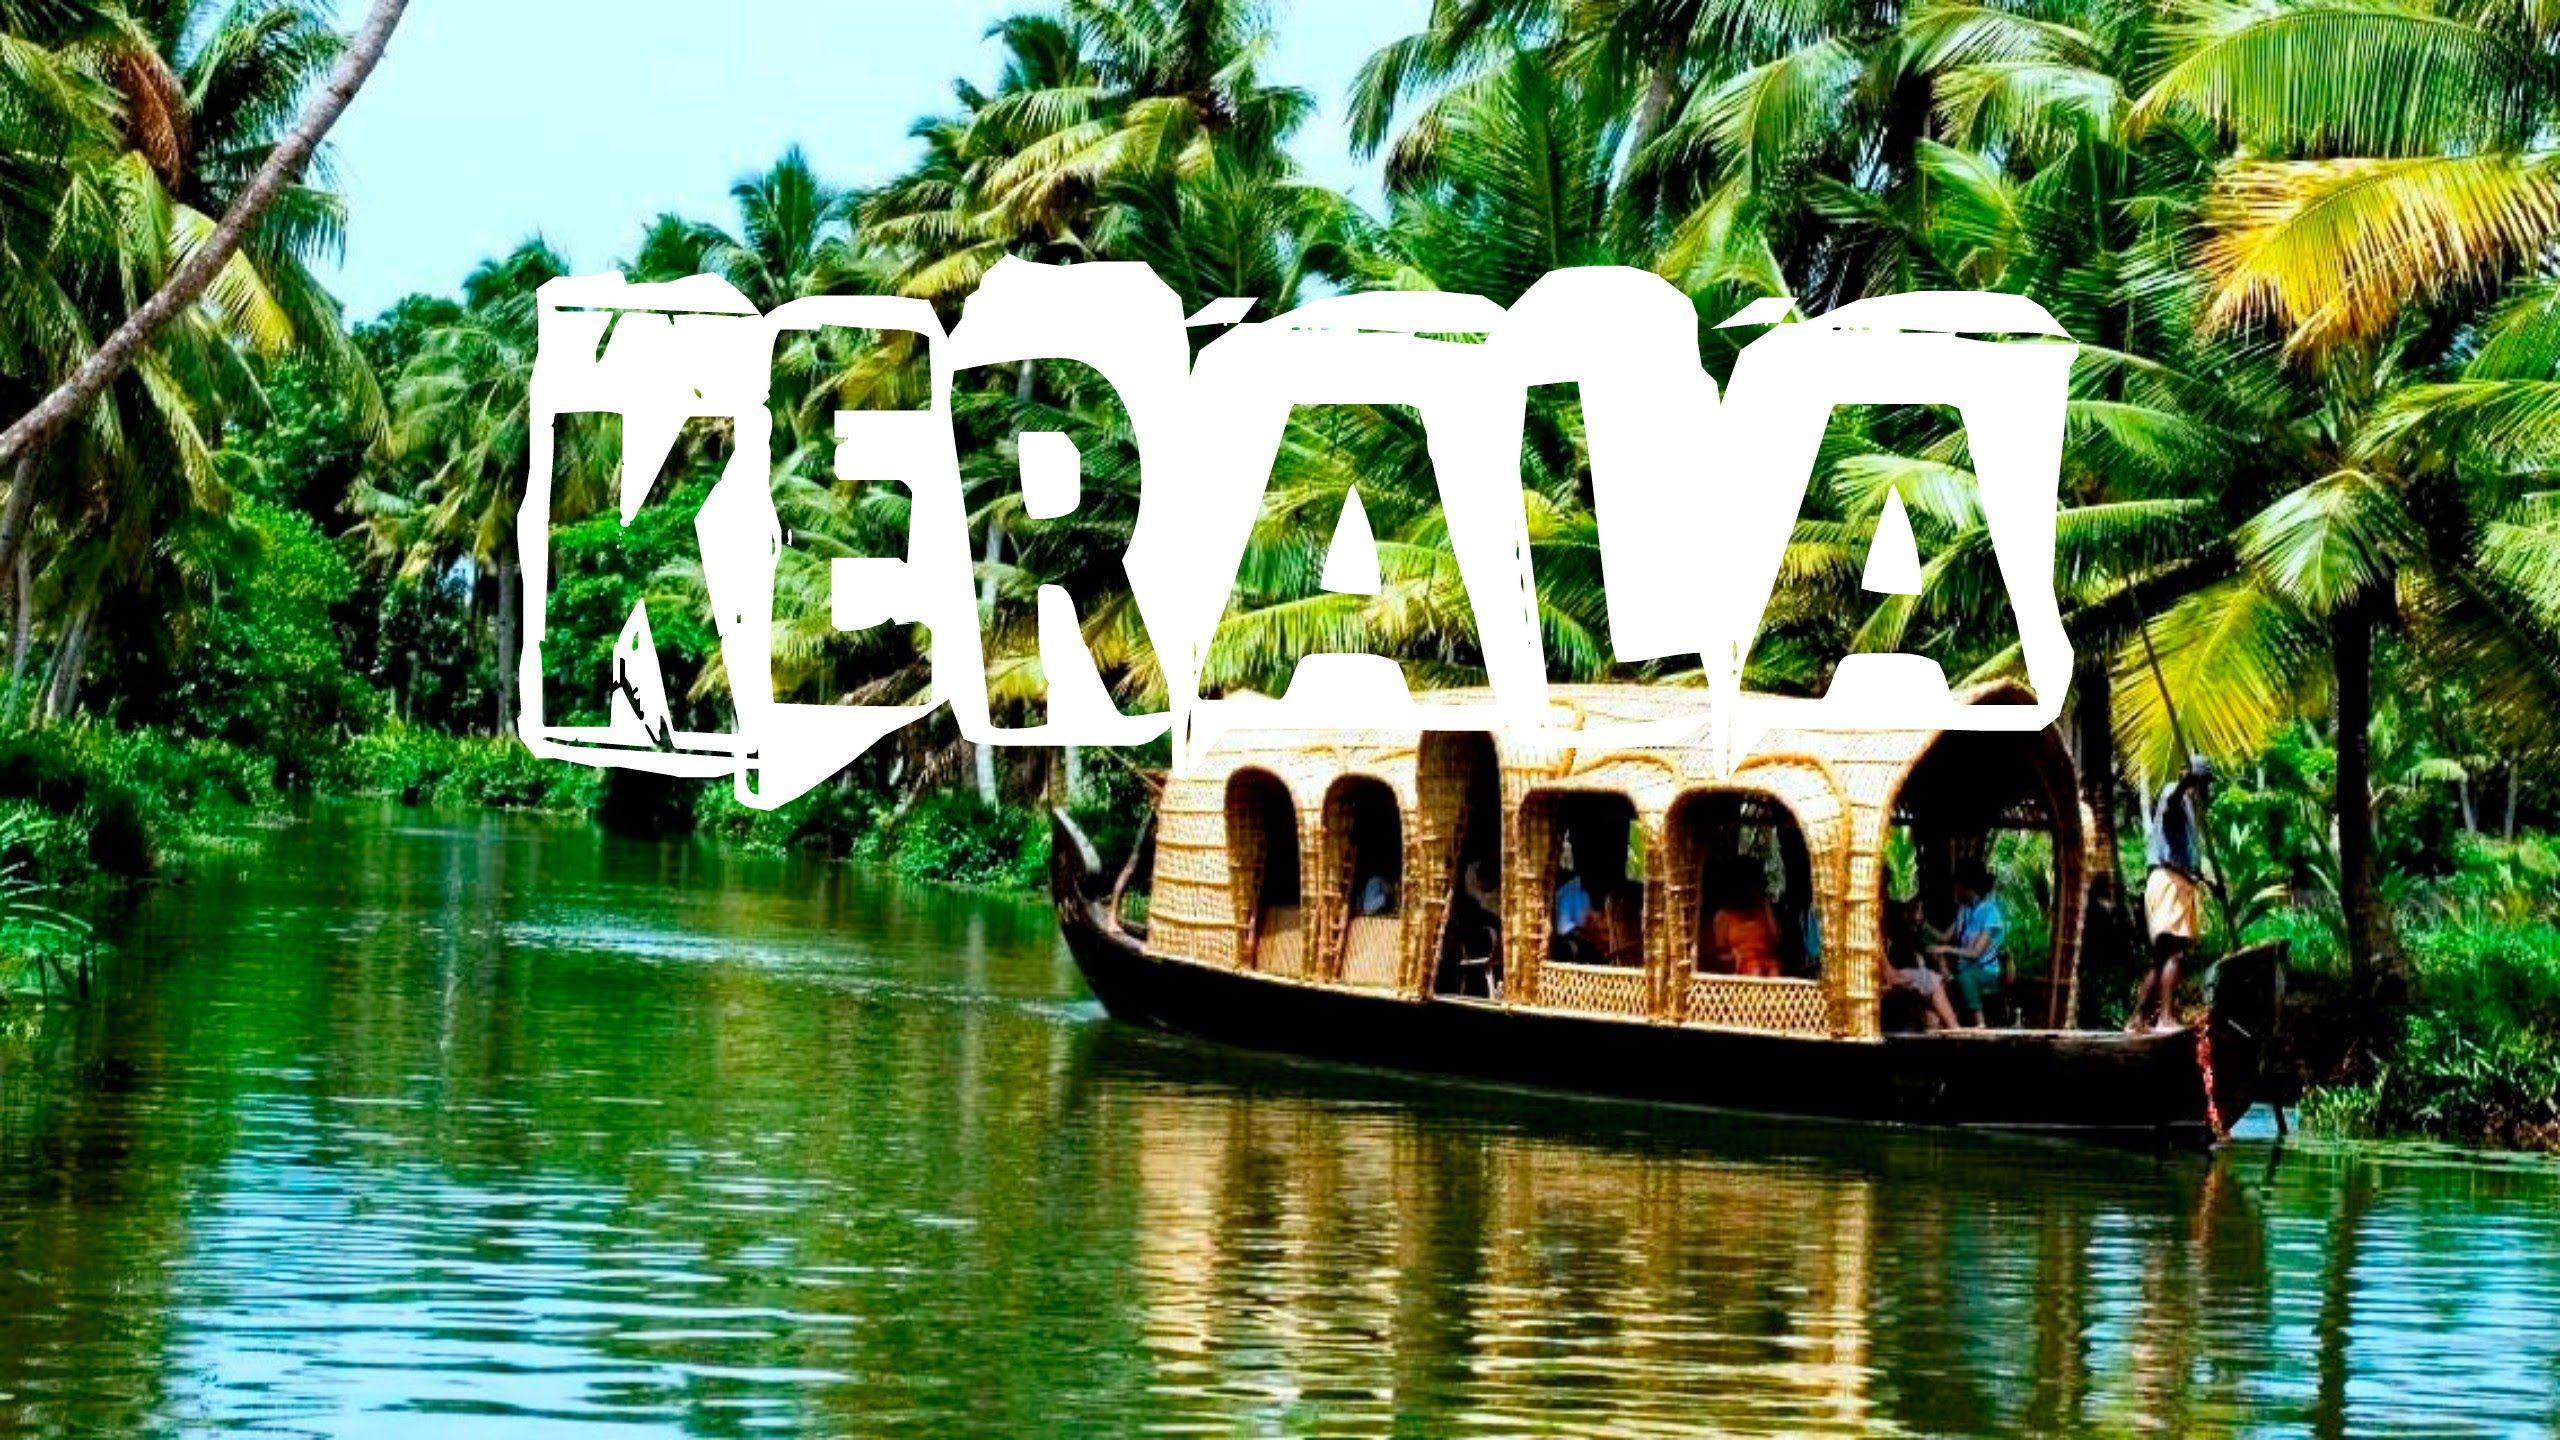 about tourism of kerala